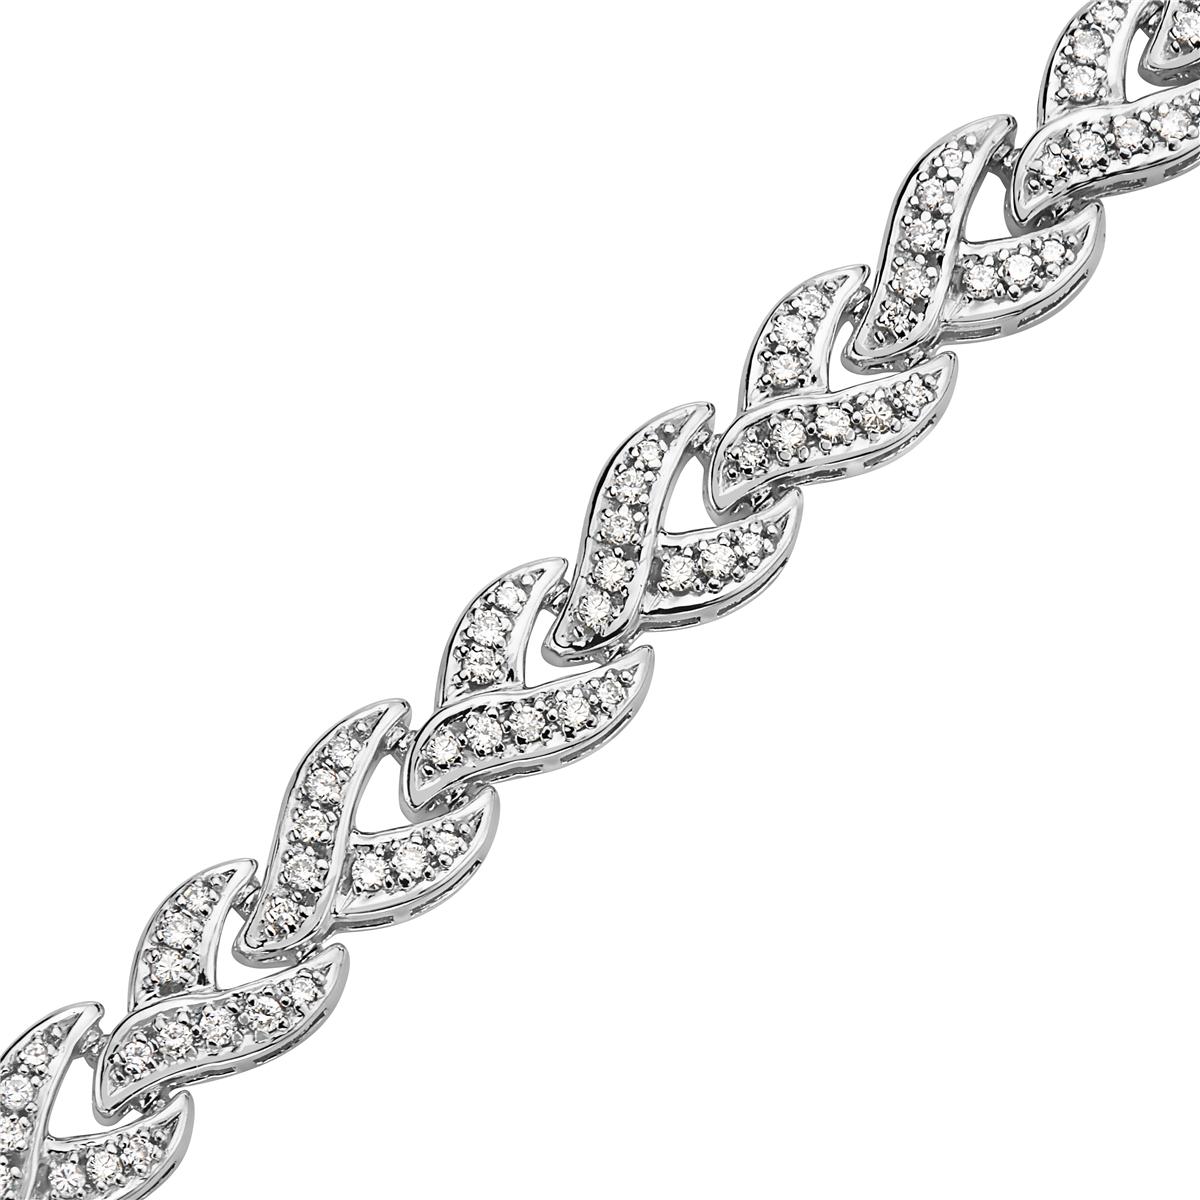 This bracelet features 2.68 carats of diamonds set in 14K white gold. 7 inch length. 26.5 grams total weight.

Resizeable upon request.

Viewings available in our NYC showroom by appointment.